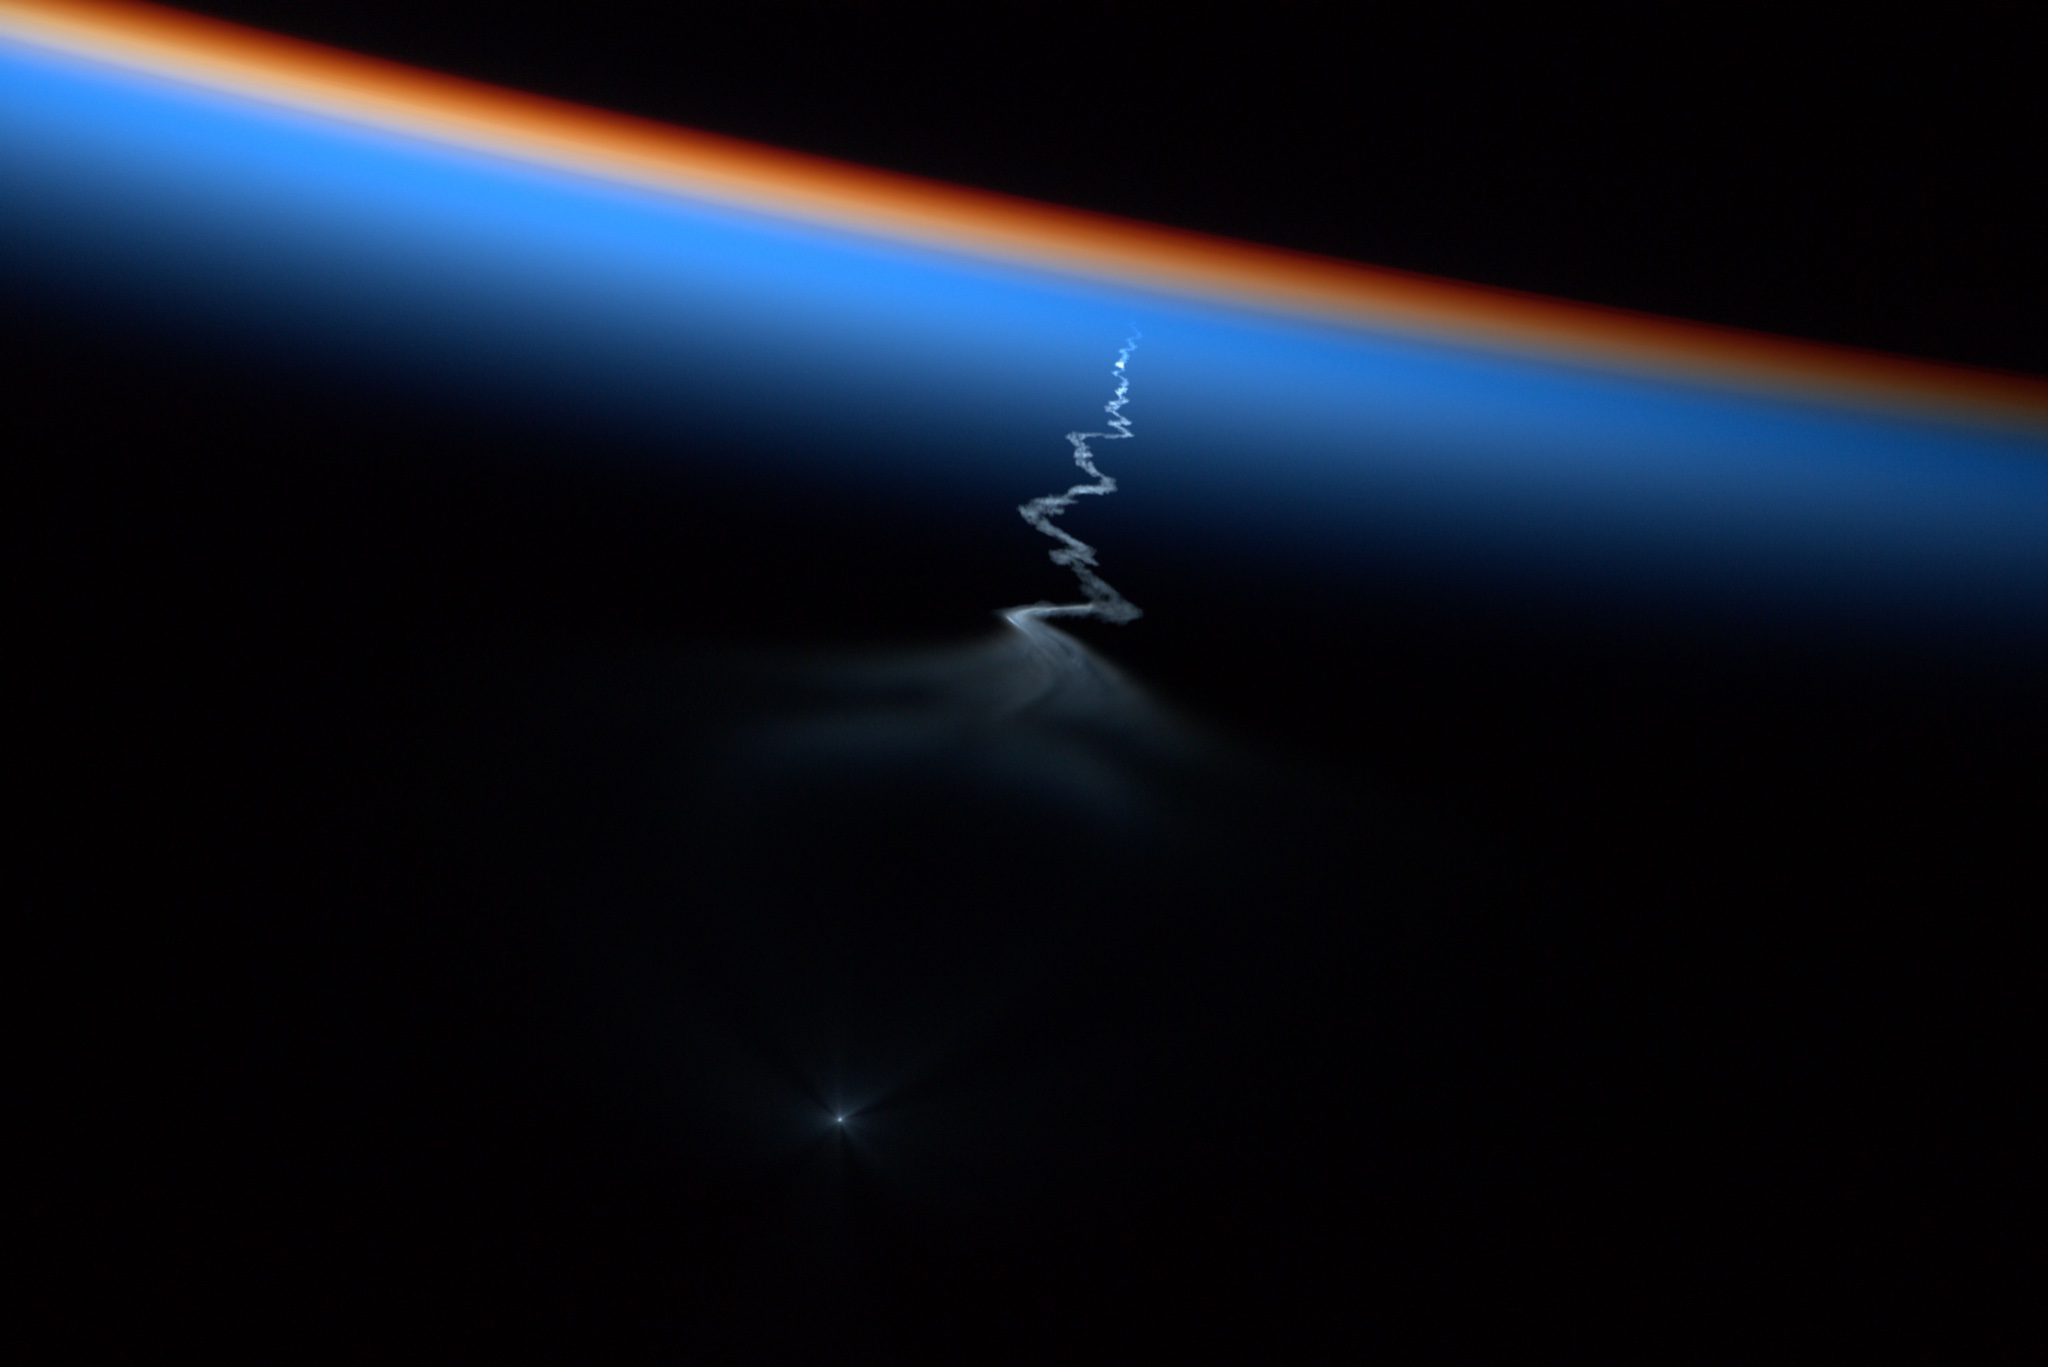 A trail thrpugh the atmosphere shows the Soyuz capsule heading towards the ISS 